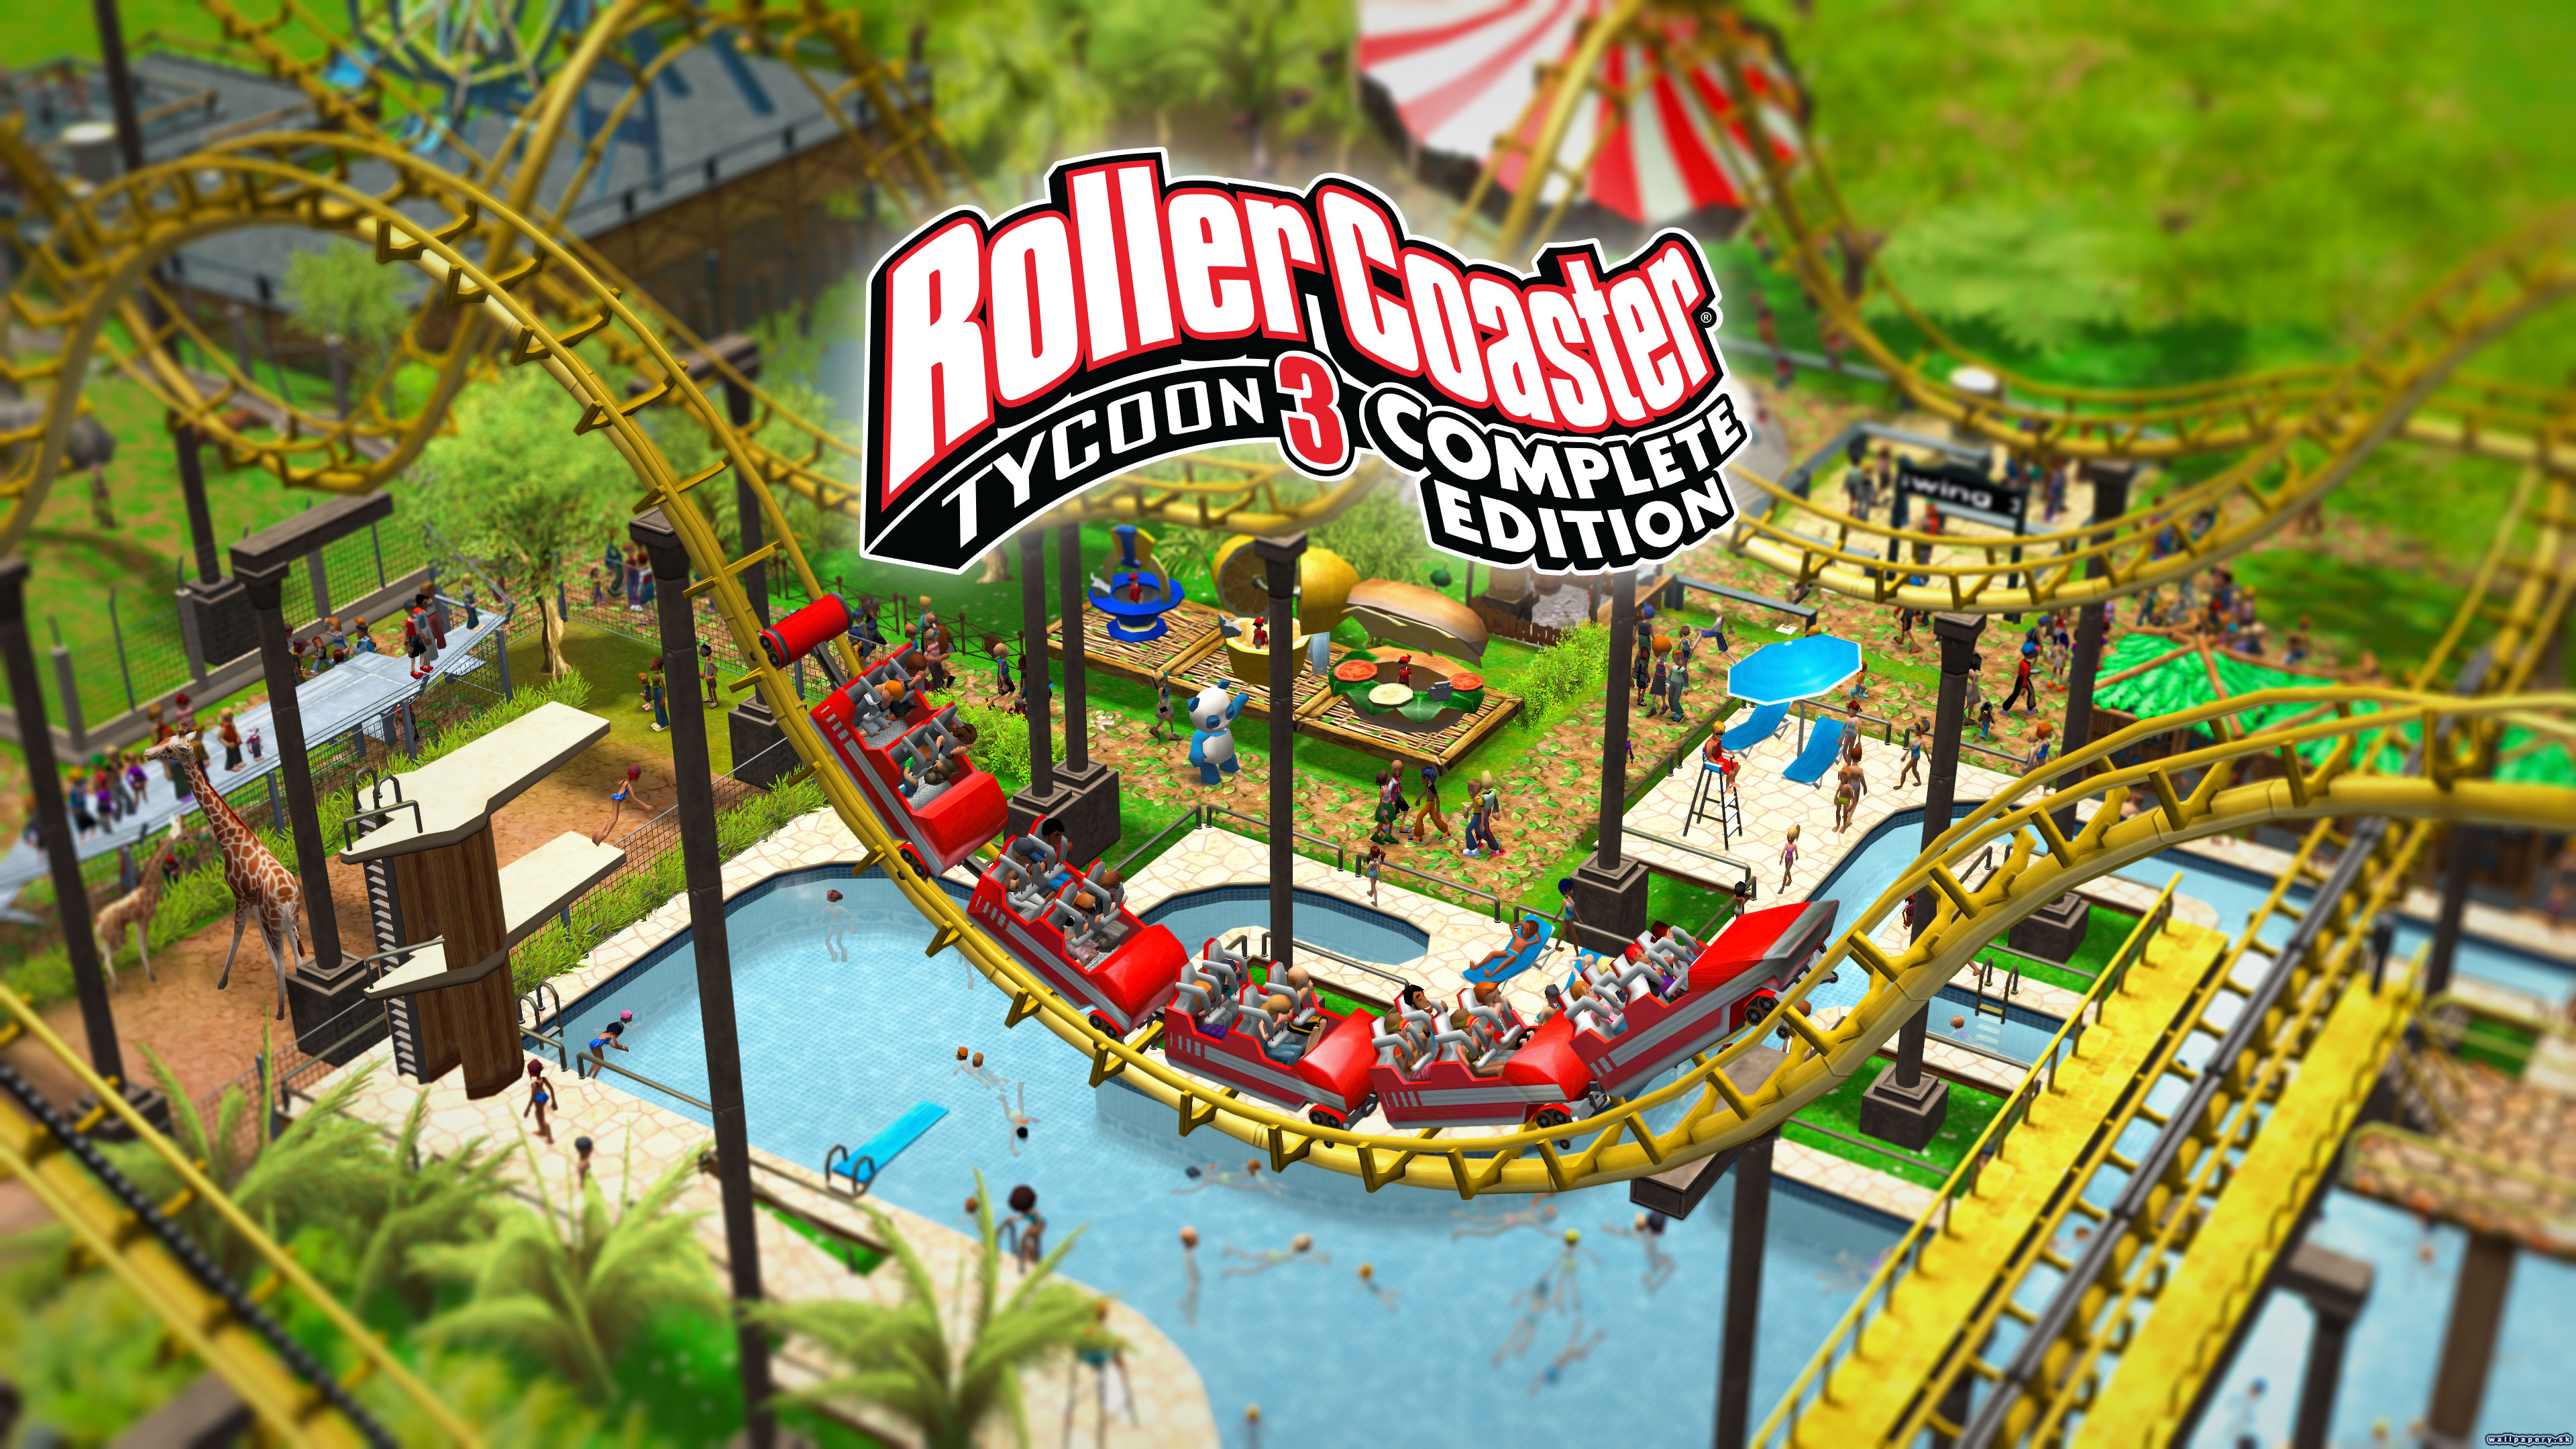 RollerCoaster Tycoon 3: Complete Edition - wallpaper 1